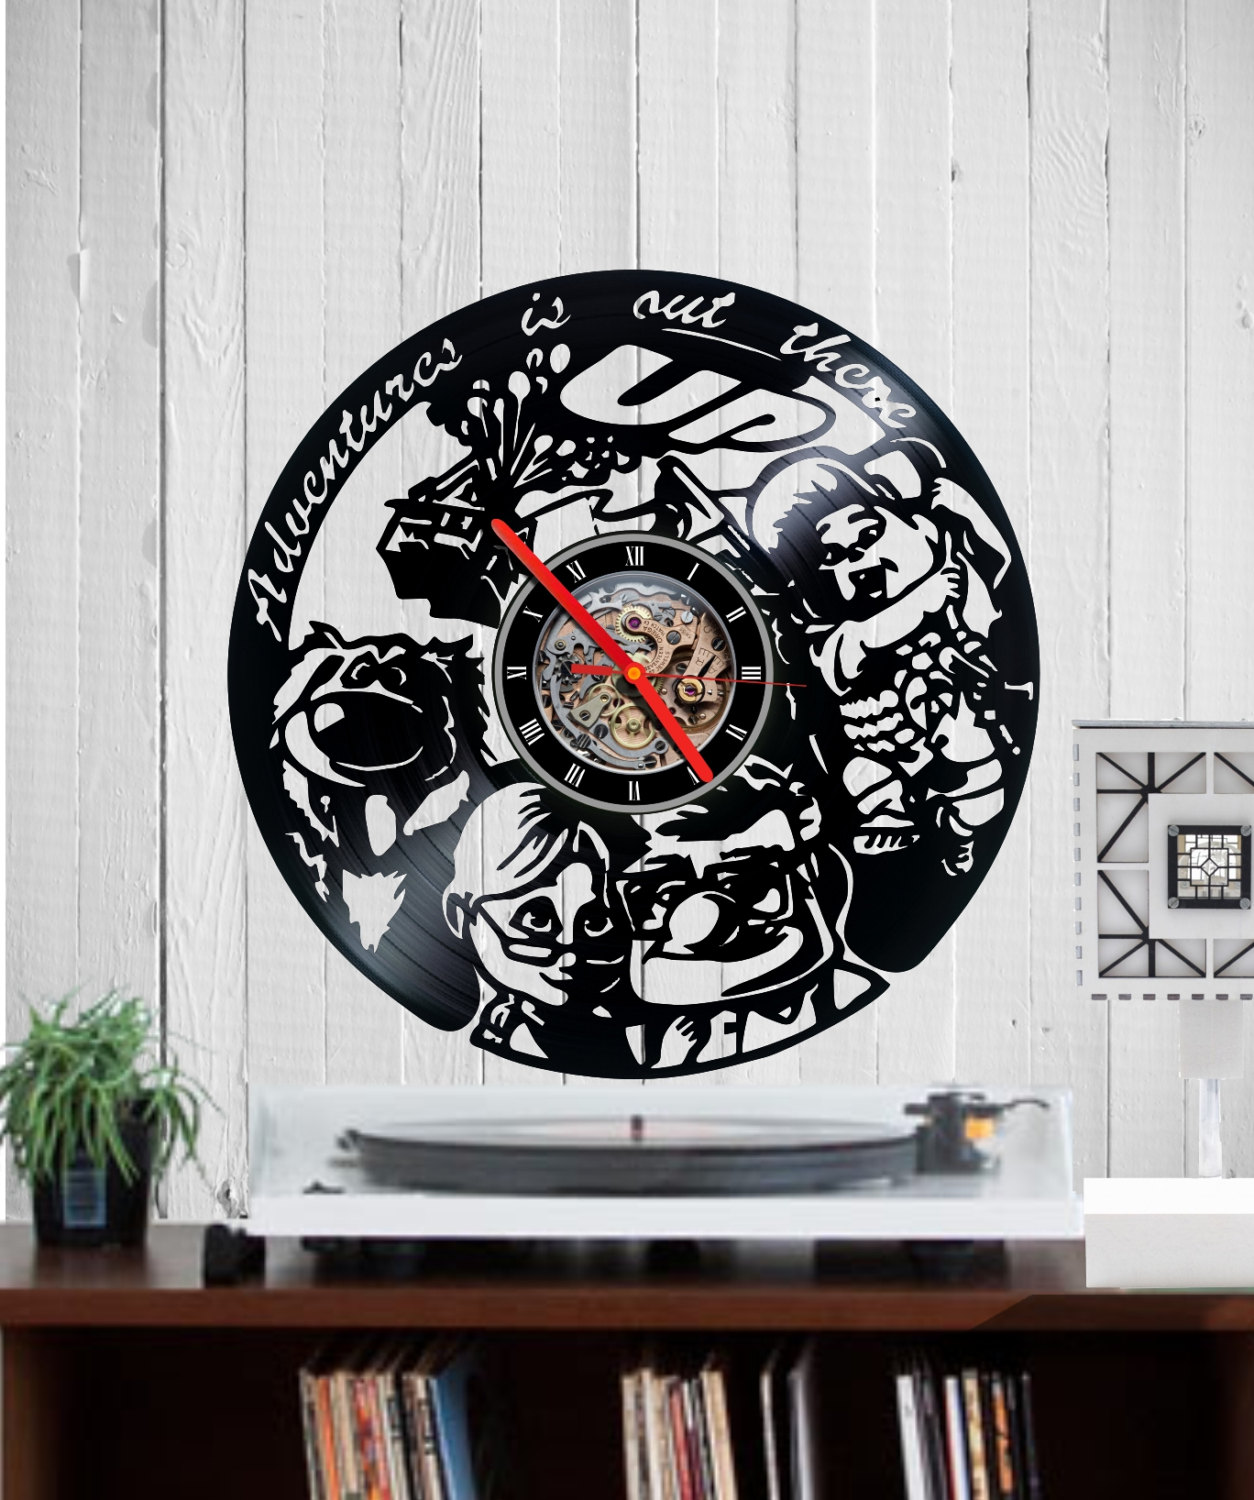 Doctor Who TV series Yellow Led Light Vinyl Record Wall Clock Get Unique Bedroom or livingroom Wall Decor Gift Ideas for Boys and Girls Perfect Element of The Interior Unique Modern Art